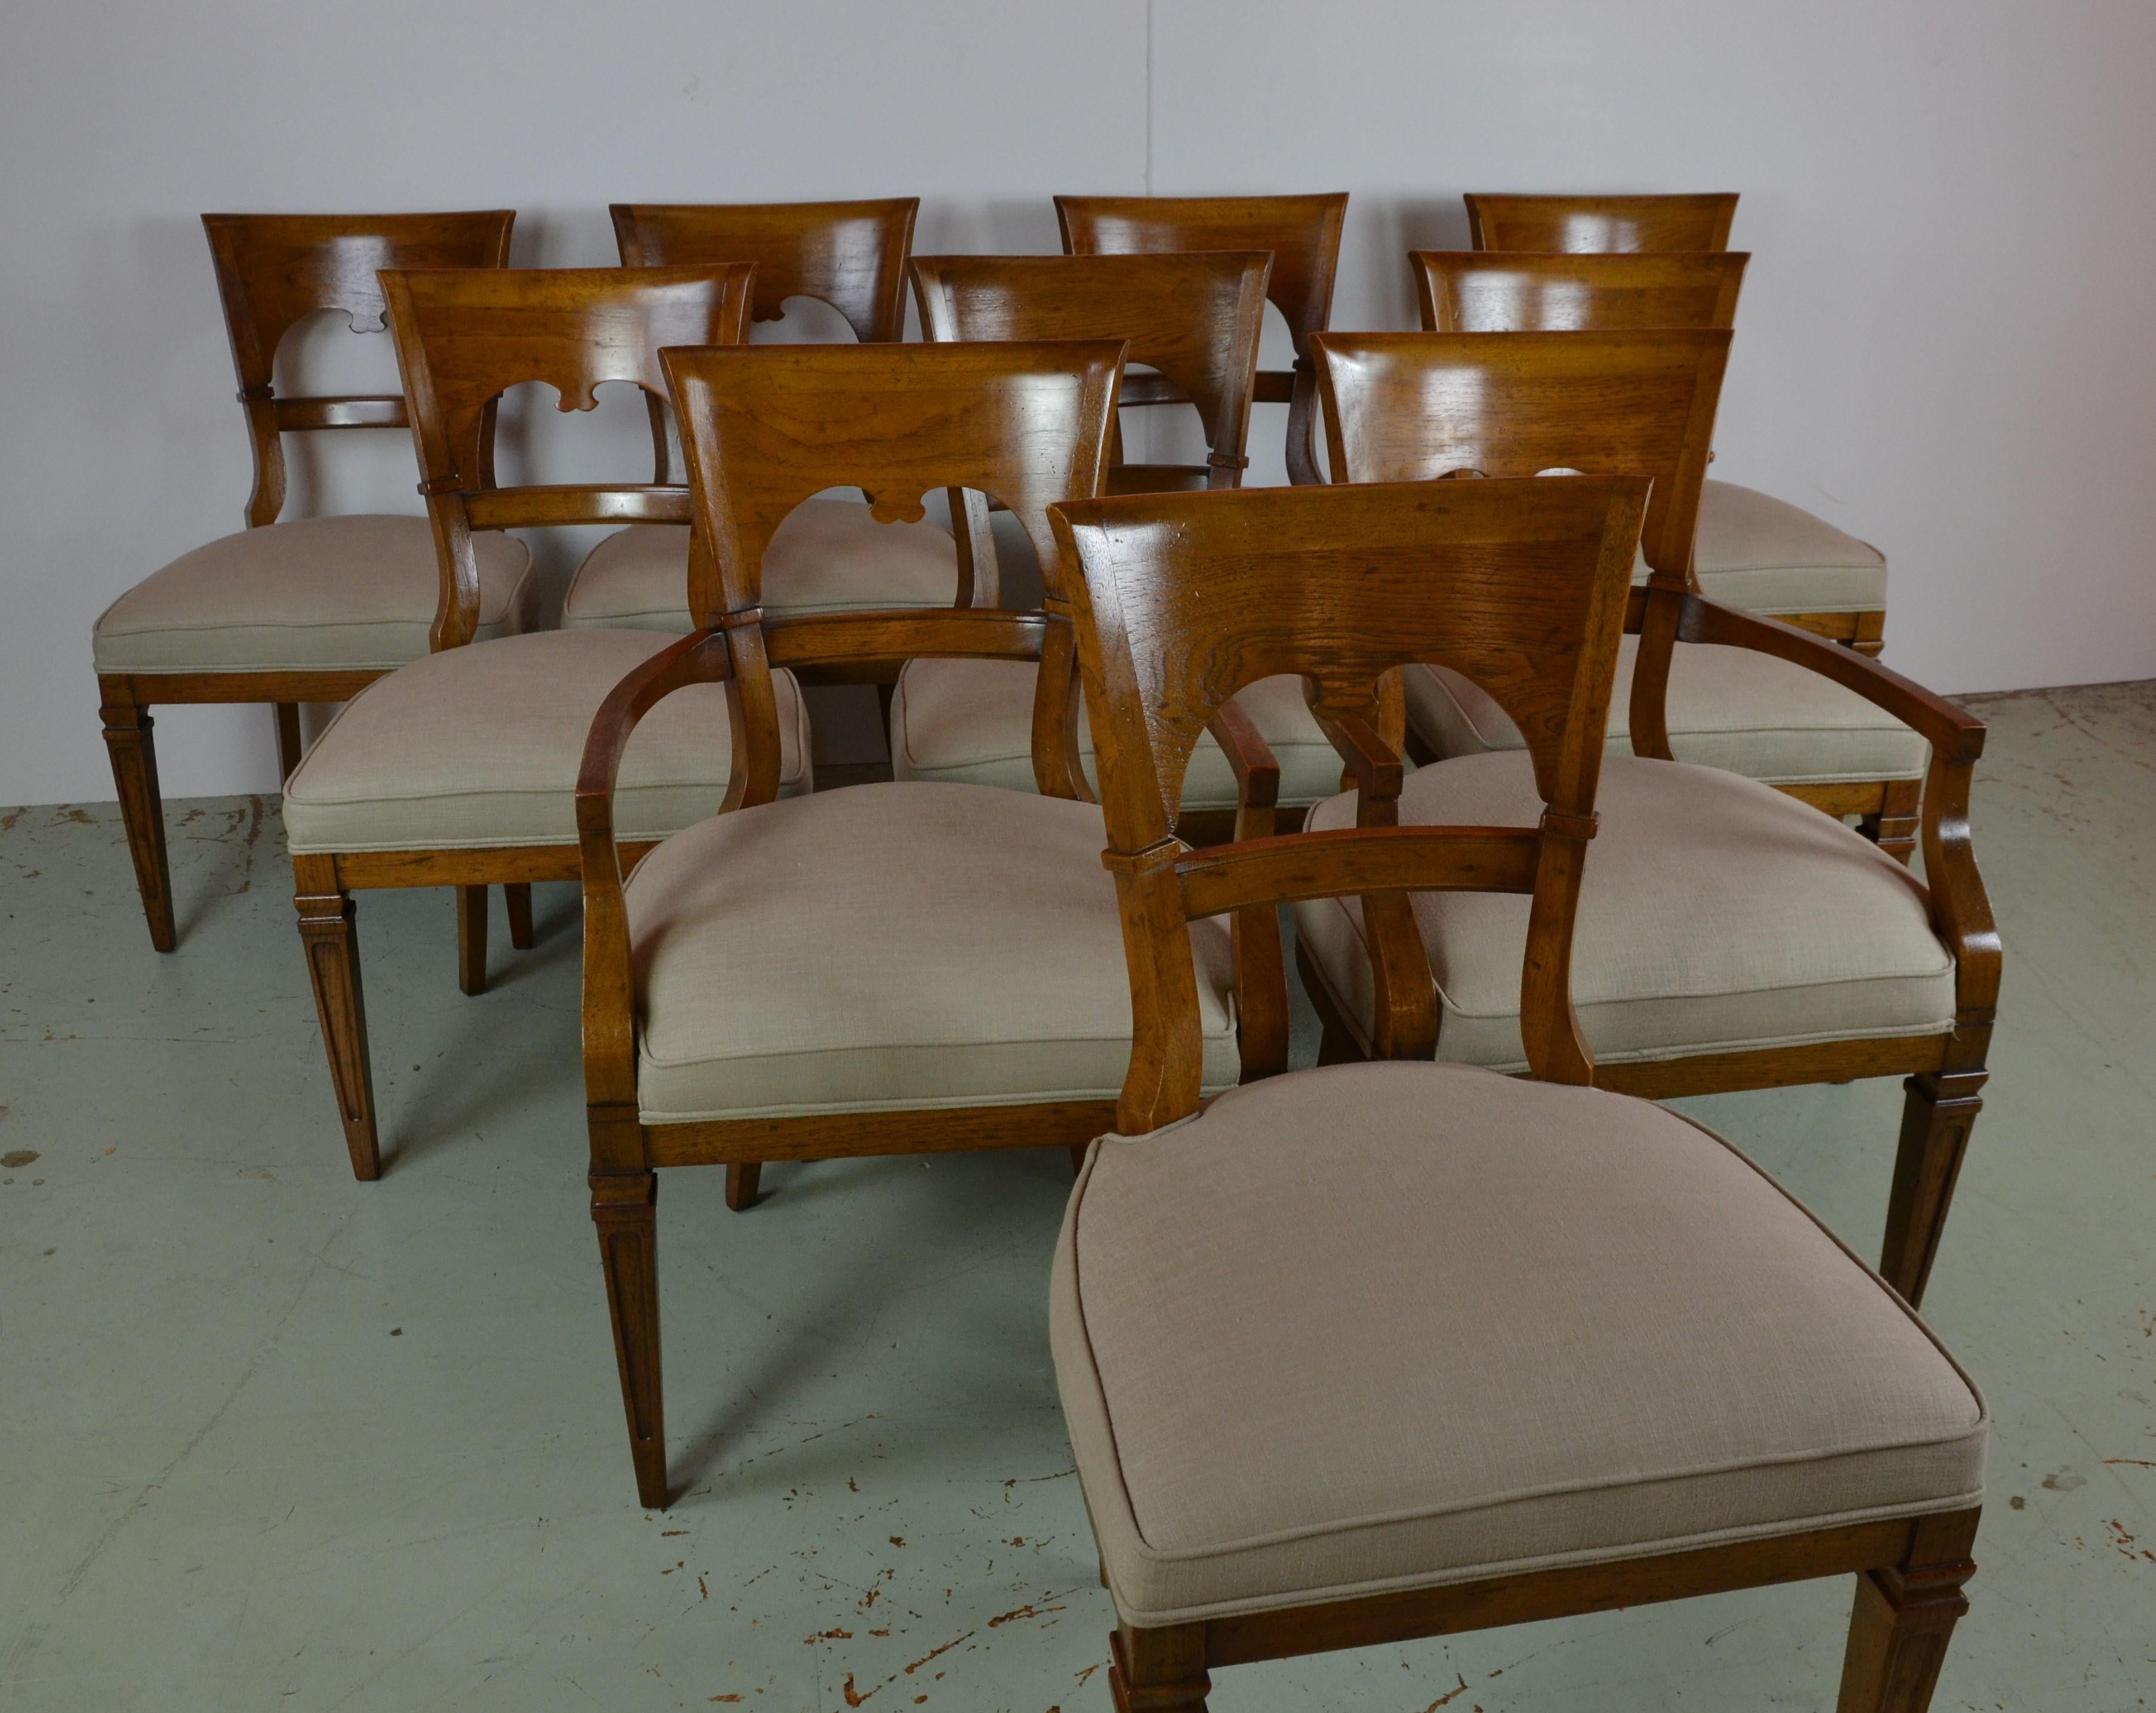 An unusual set of 10 dining chairs in pecan-wood. Having a transitional style of Formal to Country. Quality made chairs. Newly upholstered in a neutral linen.